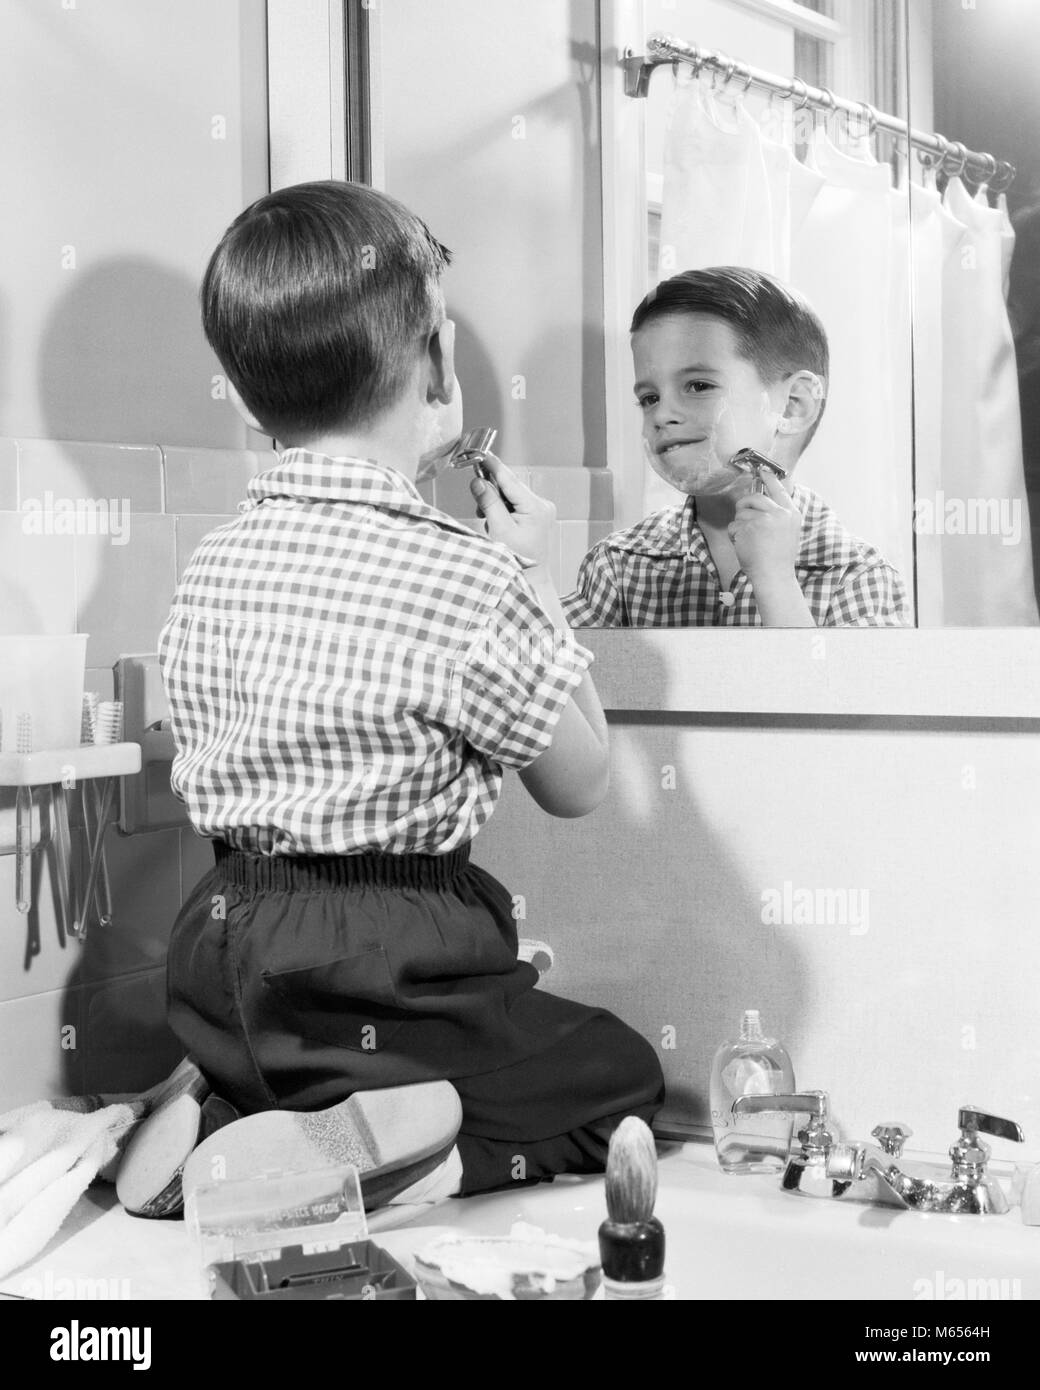 1950s BOY KNEELING BATHROOM SINK TRYING TO SHAVE HIS BEARD LIKE FATHER LIKE SON - bj002472 CAM001 HARS BRUNETTE KNEELING 5-6 YEARS HIS SHAVE TRYING VERTICAL FACIAL HAIR GROWTH LIKE BEHAVIOR JUVENILES MALES B&W BLACK AND WHITE CAUCASIAN ETHNICITY DATED IMITATION OLD FASHIONED OLD-FASHIONED PERSONS SINGLE BOY IN Stock Photo